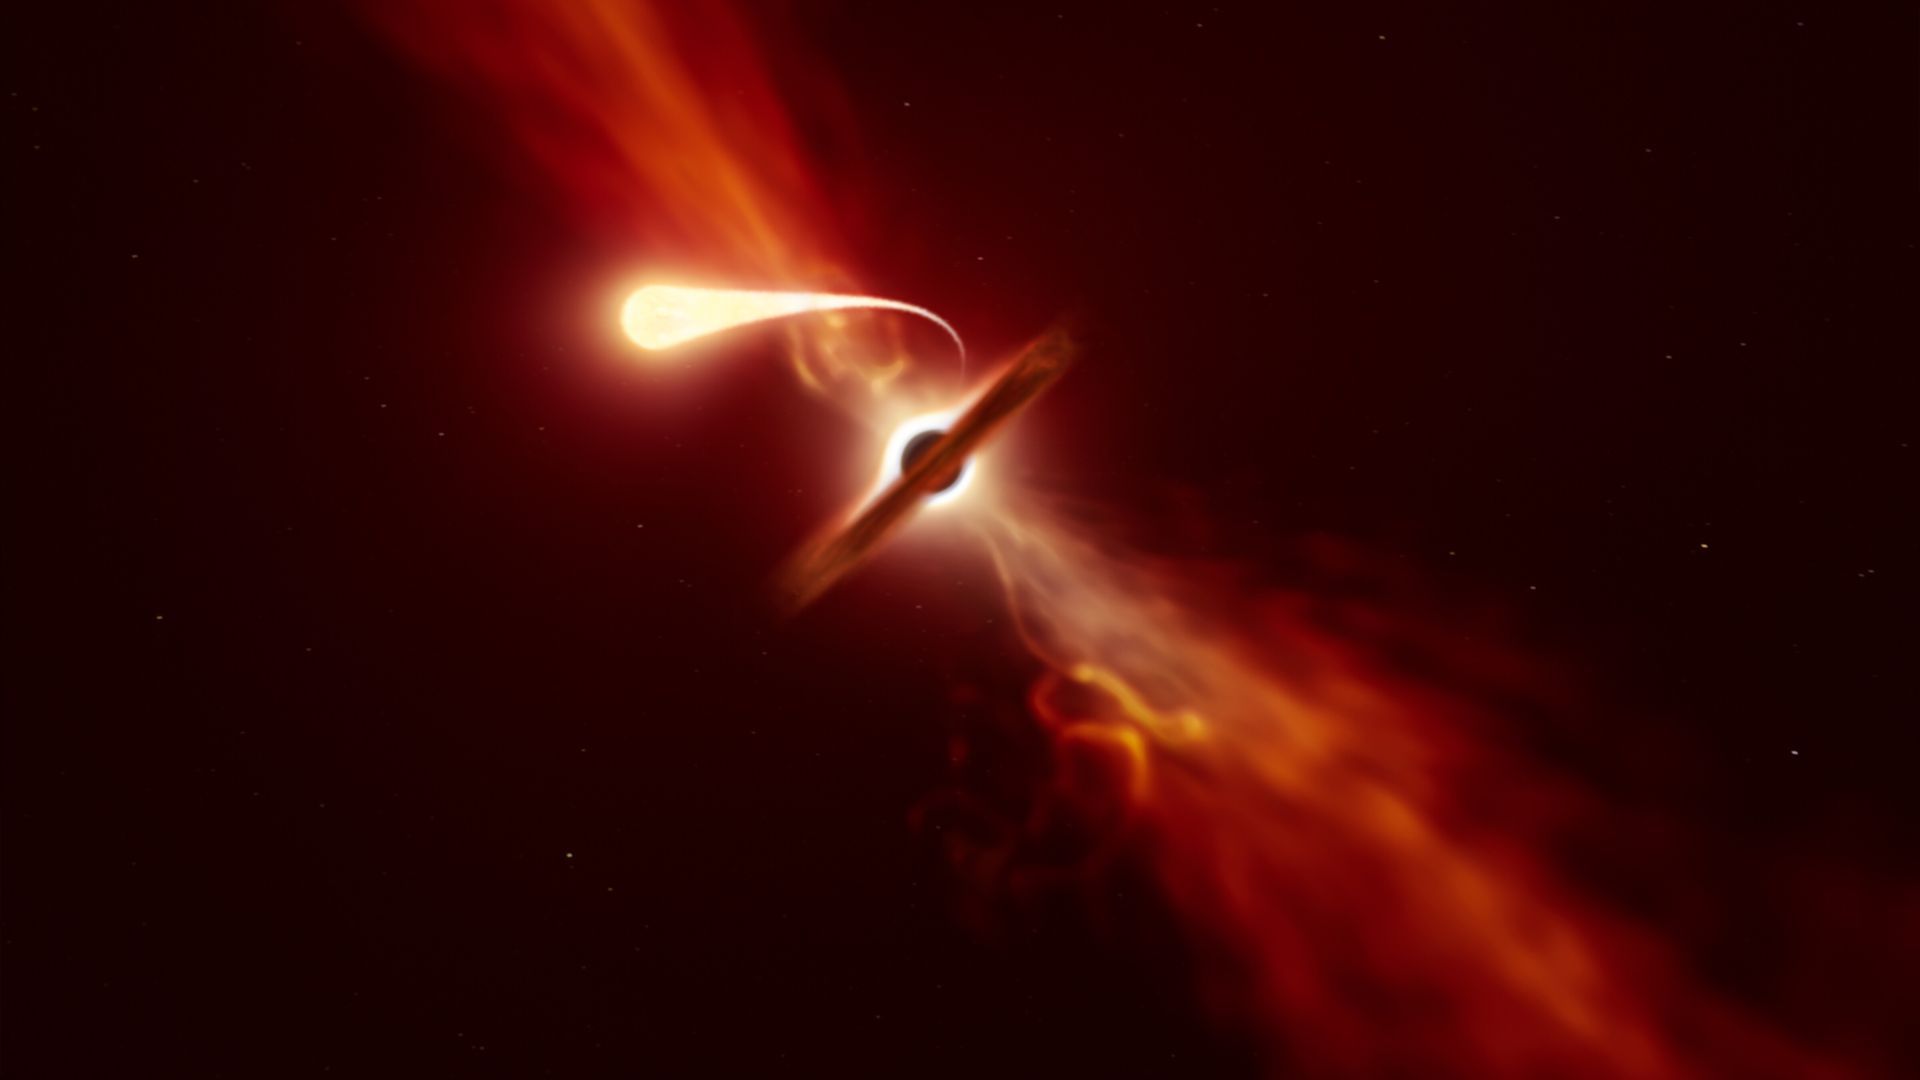 An illustration of a star being destroyed by a black hole. Image: ESO/M. Kornmesser